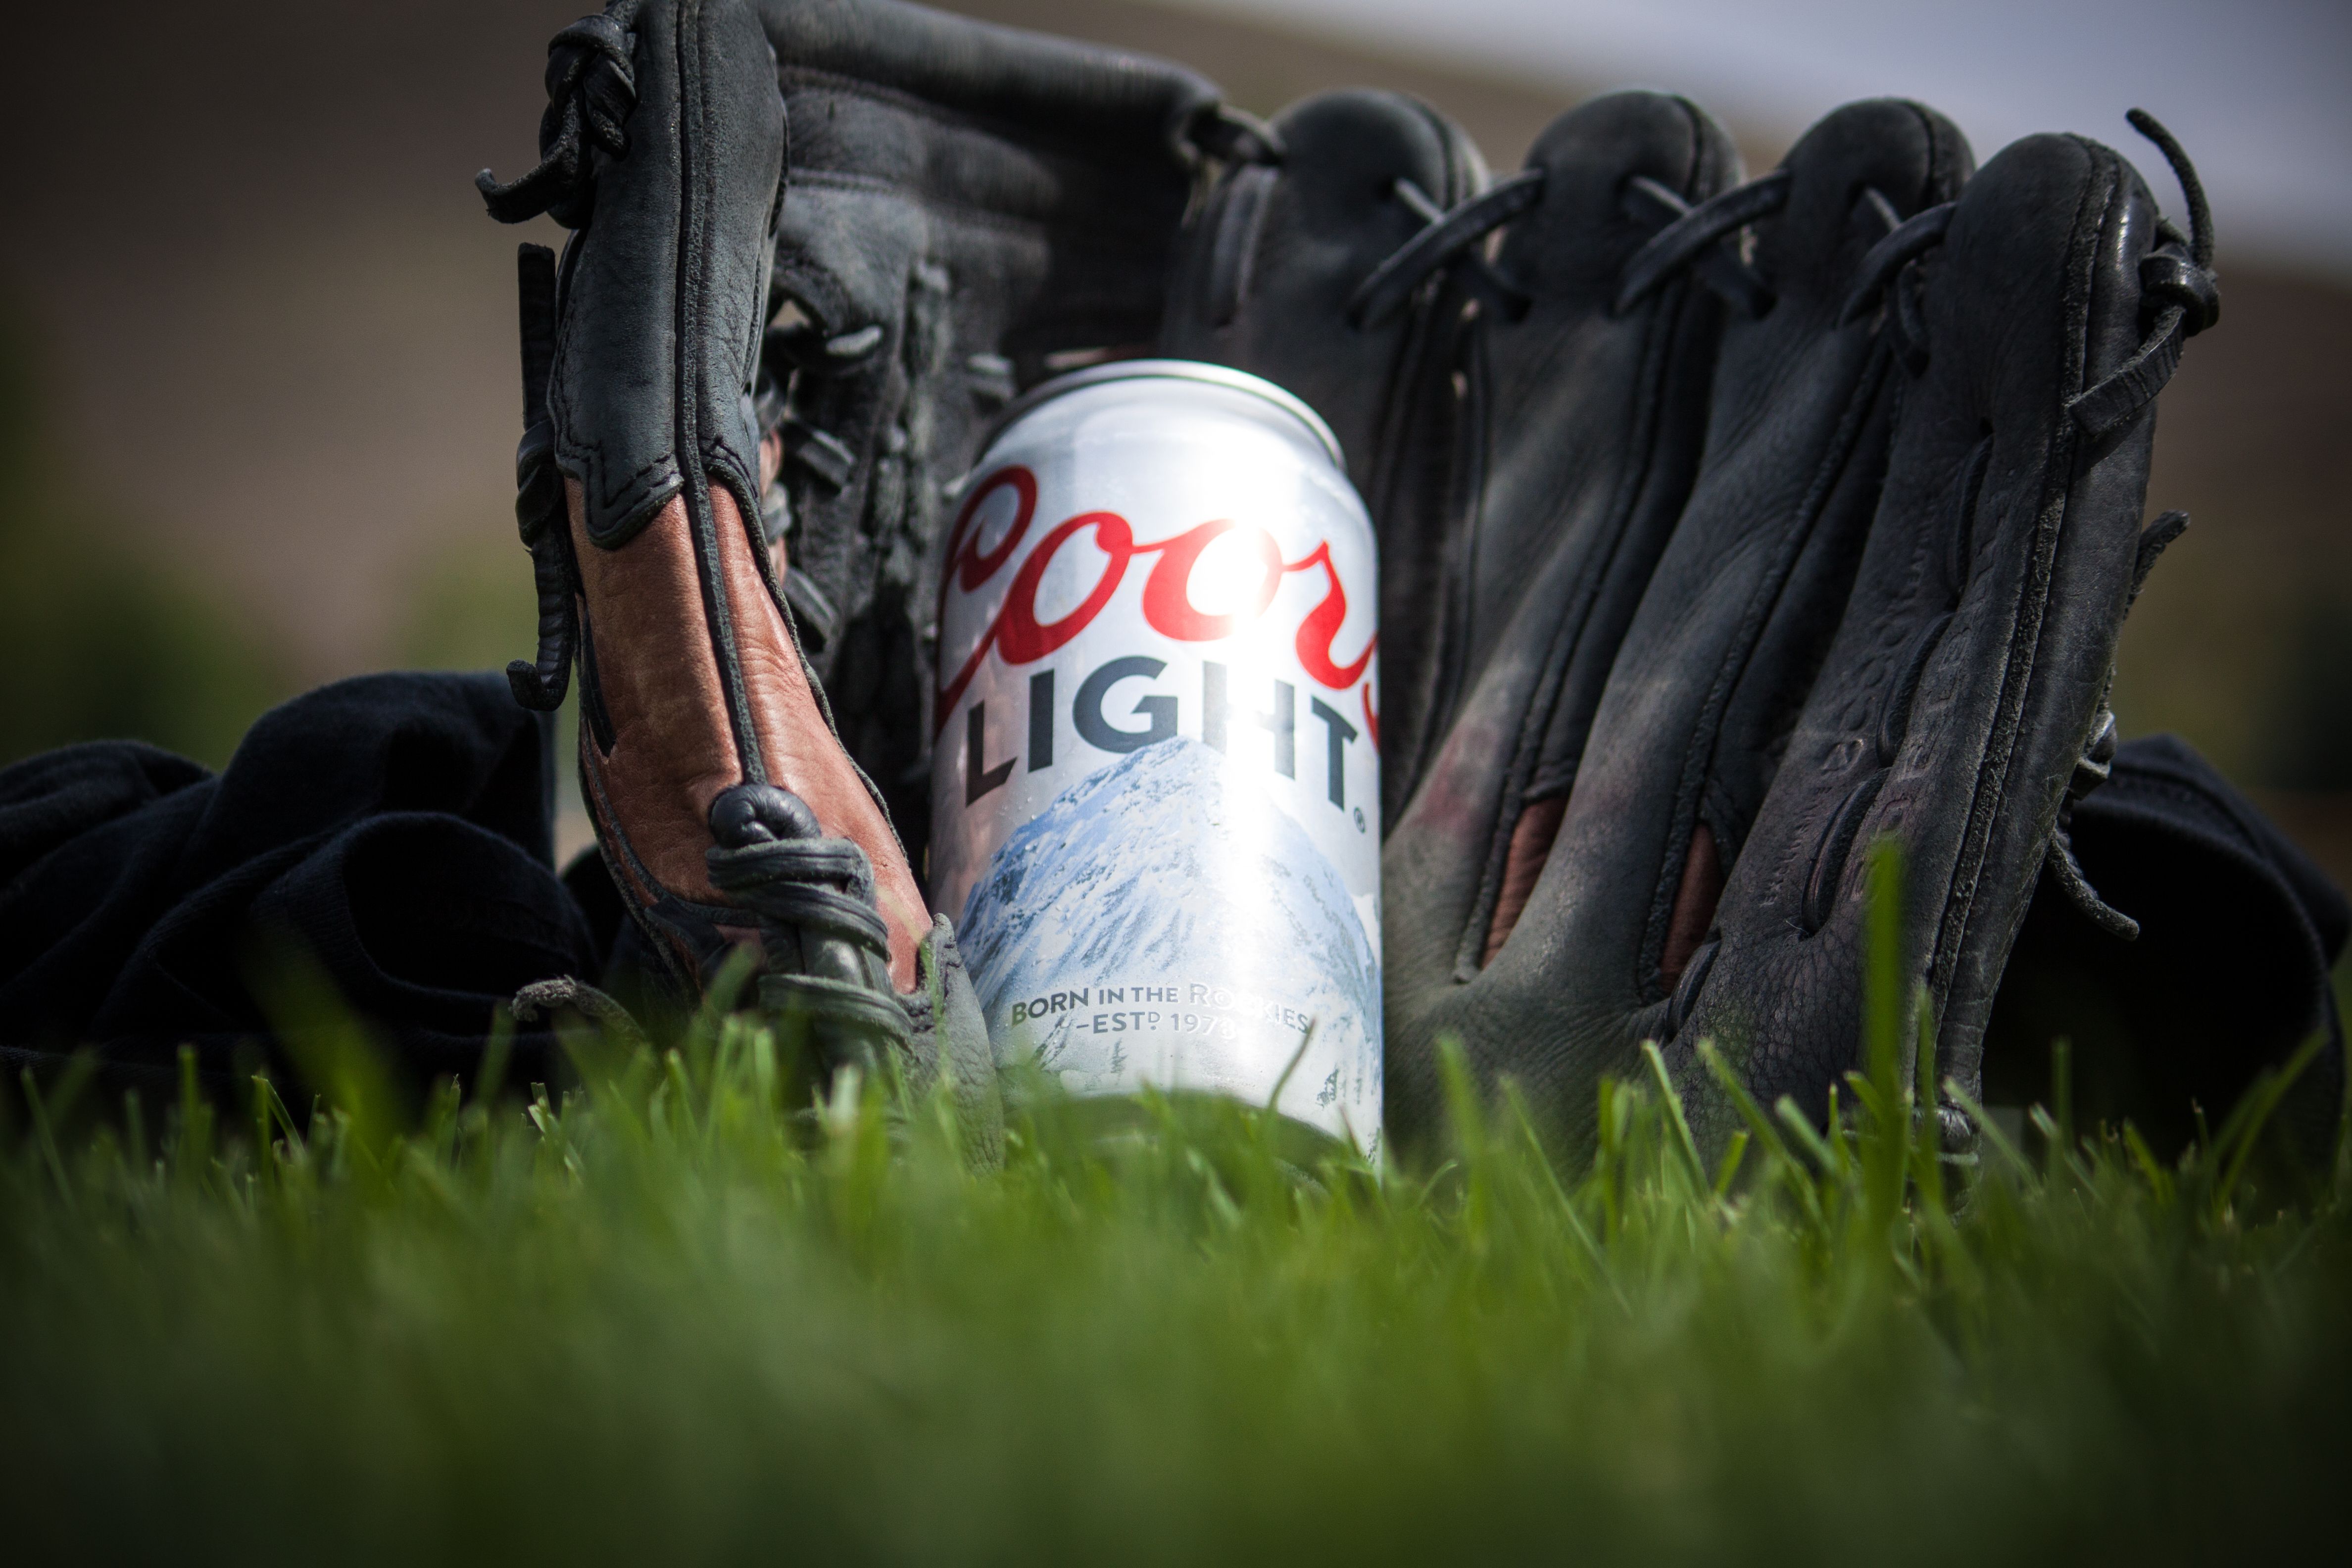 Close Up Photography of Coors Light Beer Near Black Baseball Mitts · Free